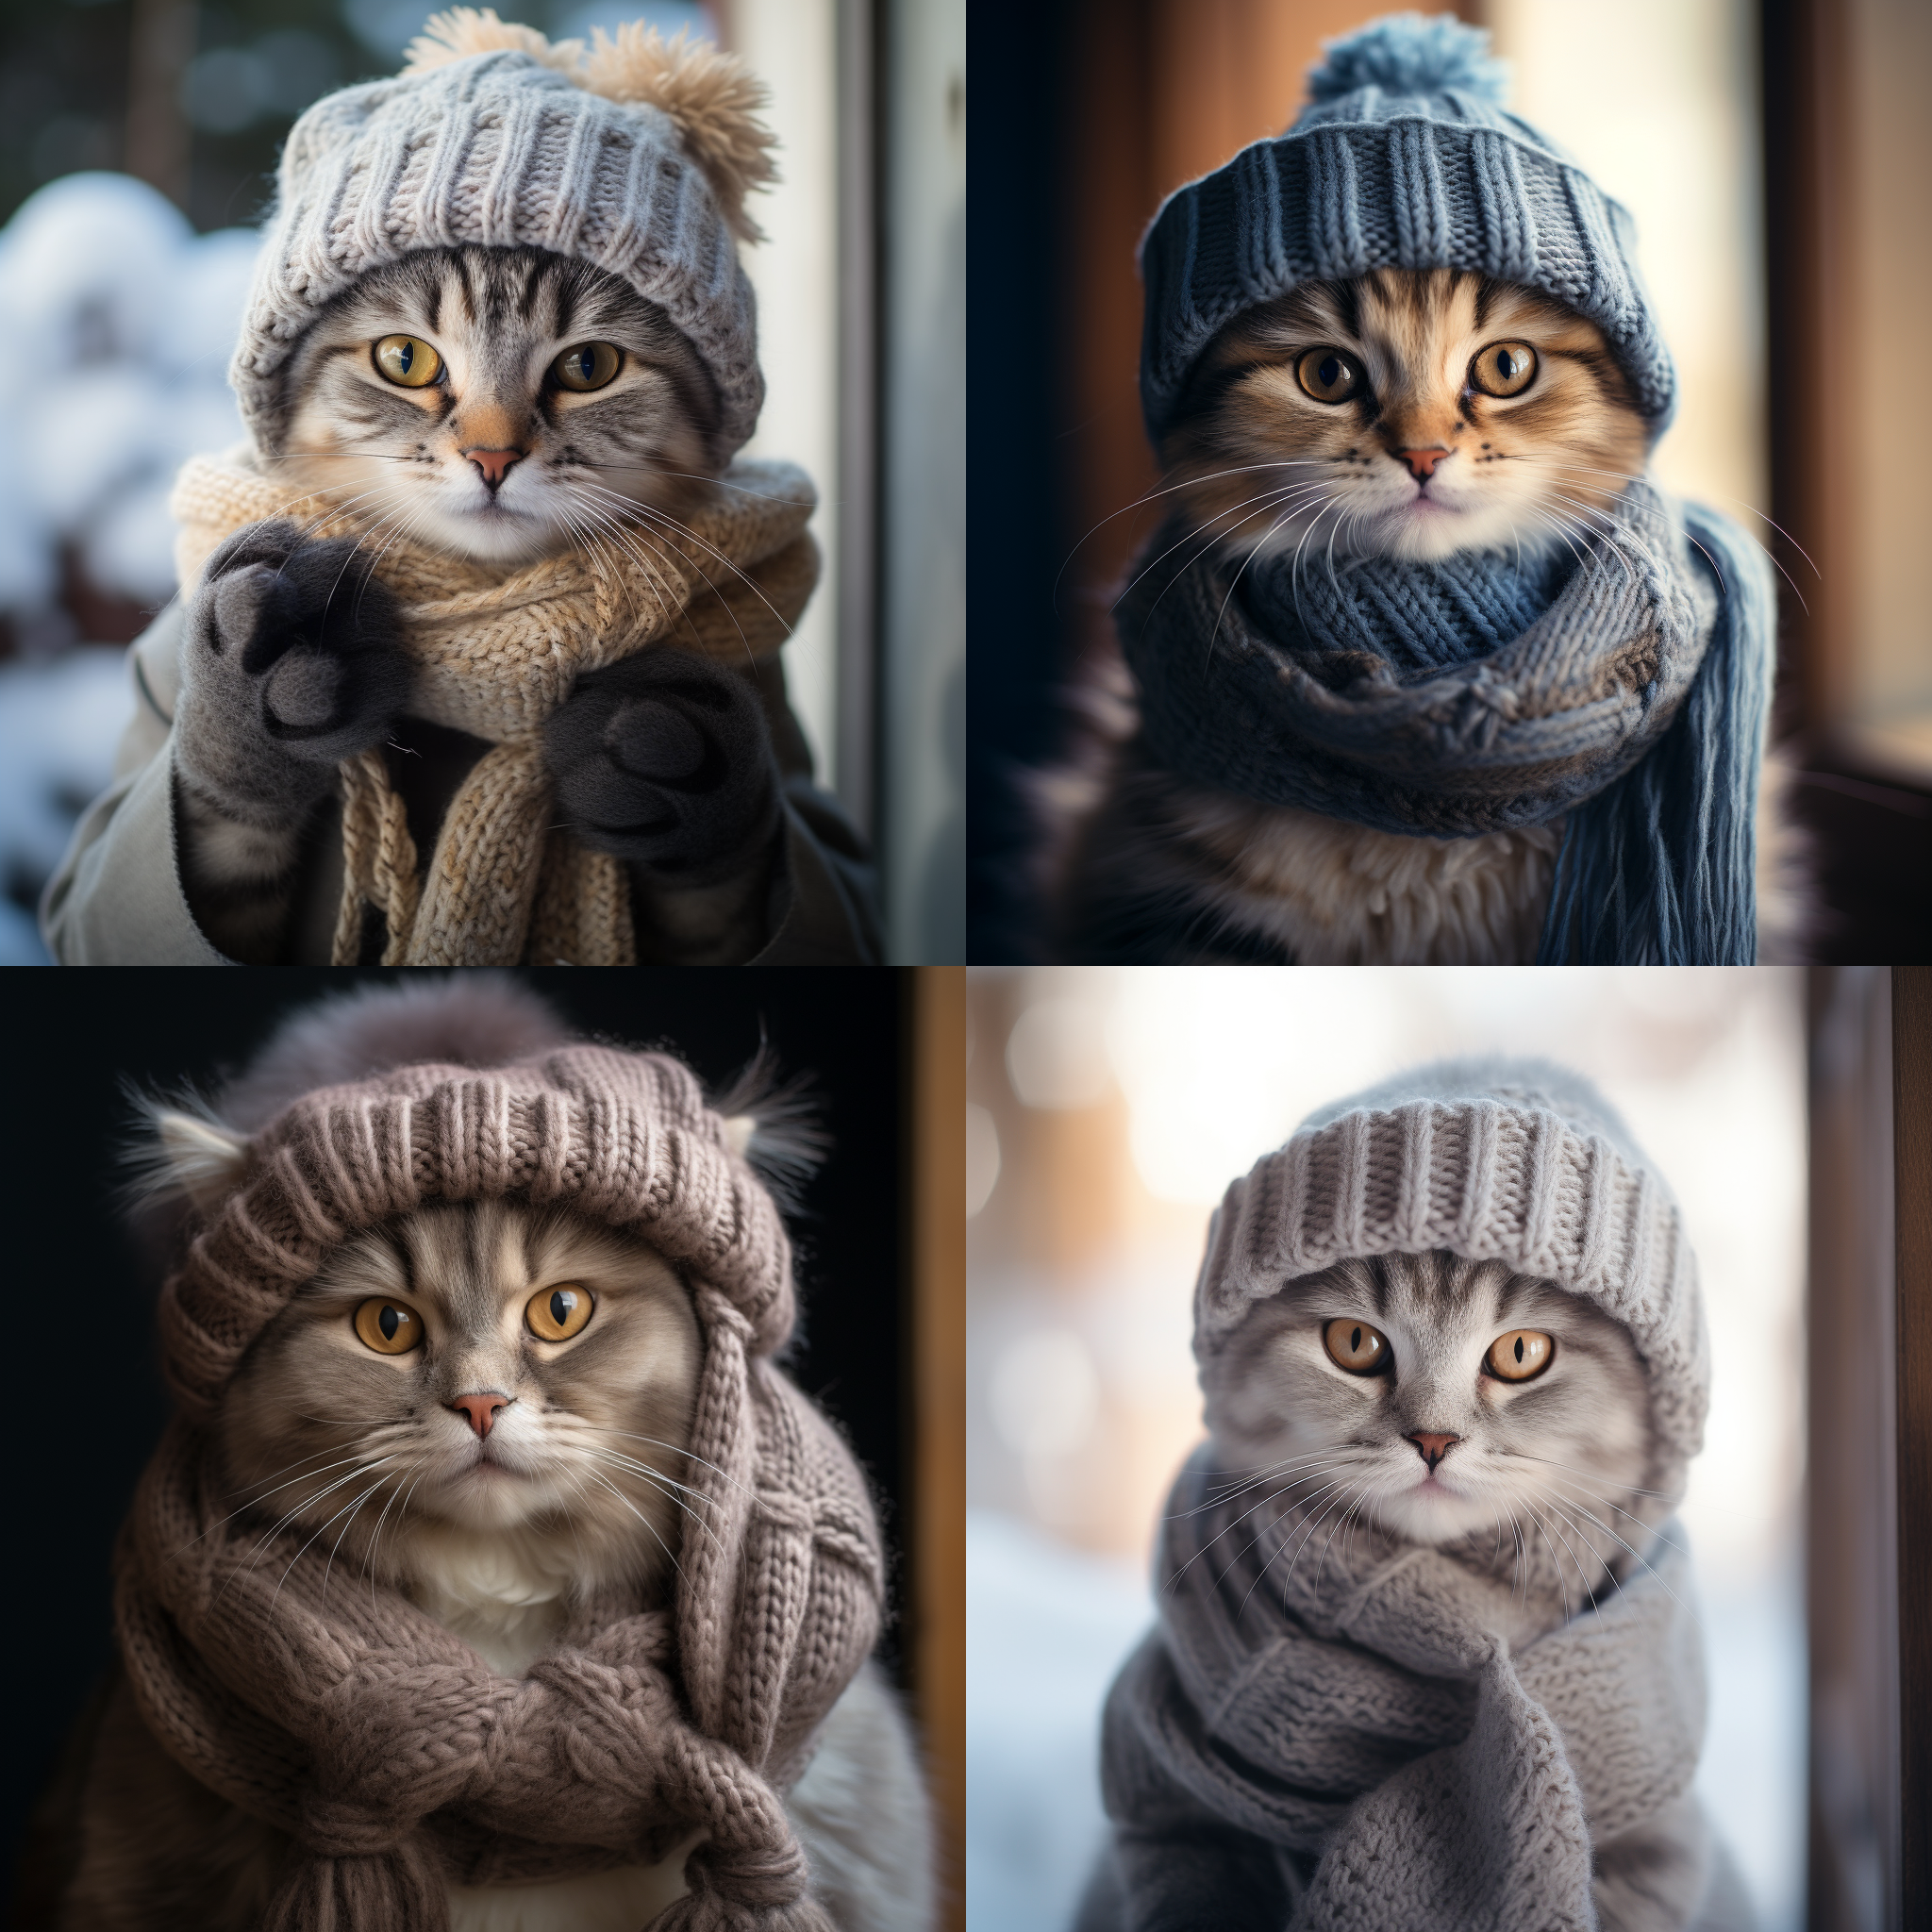 A cute cat wearing a hat, scarf, and gloves